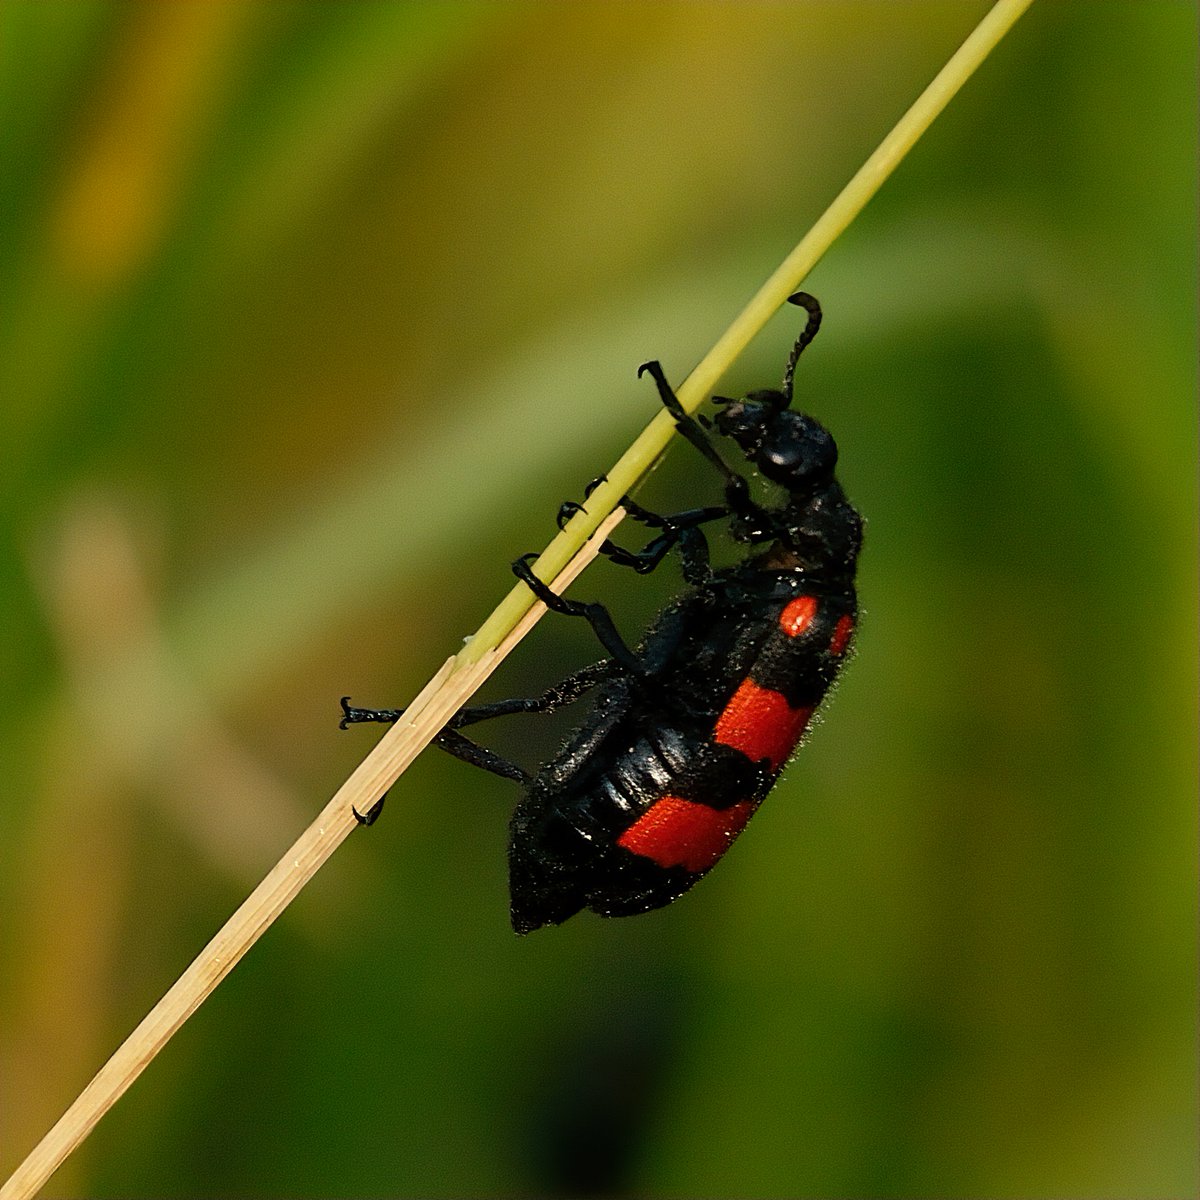 Insects help maintain balance in ecosystems. And our today's special is 'Insects'. Do you have any Insects pic to share. Blister Beetle #IndiAves #ThePhotoHour #InsectsSpecial